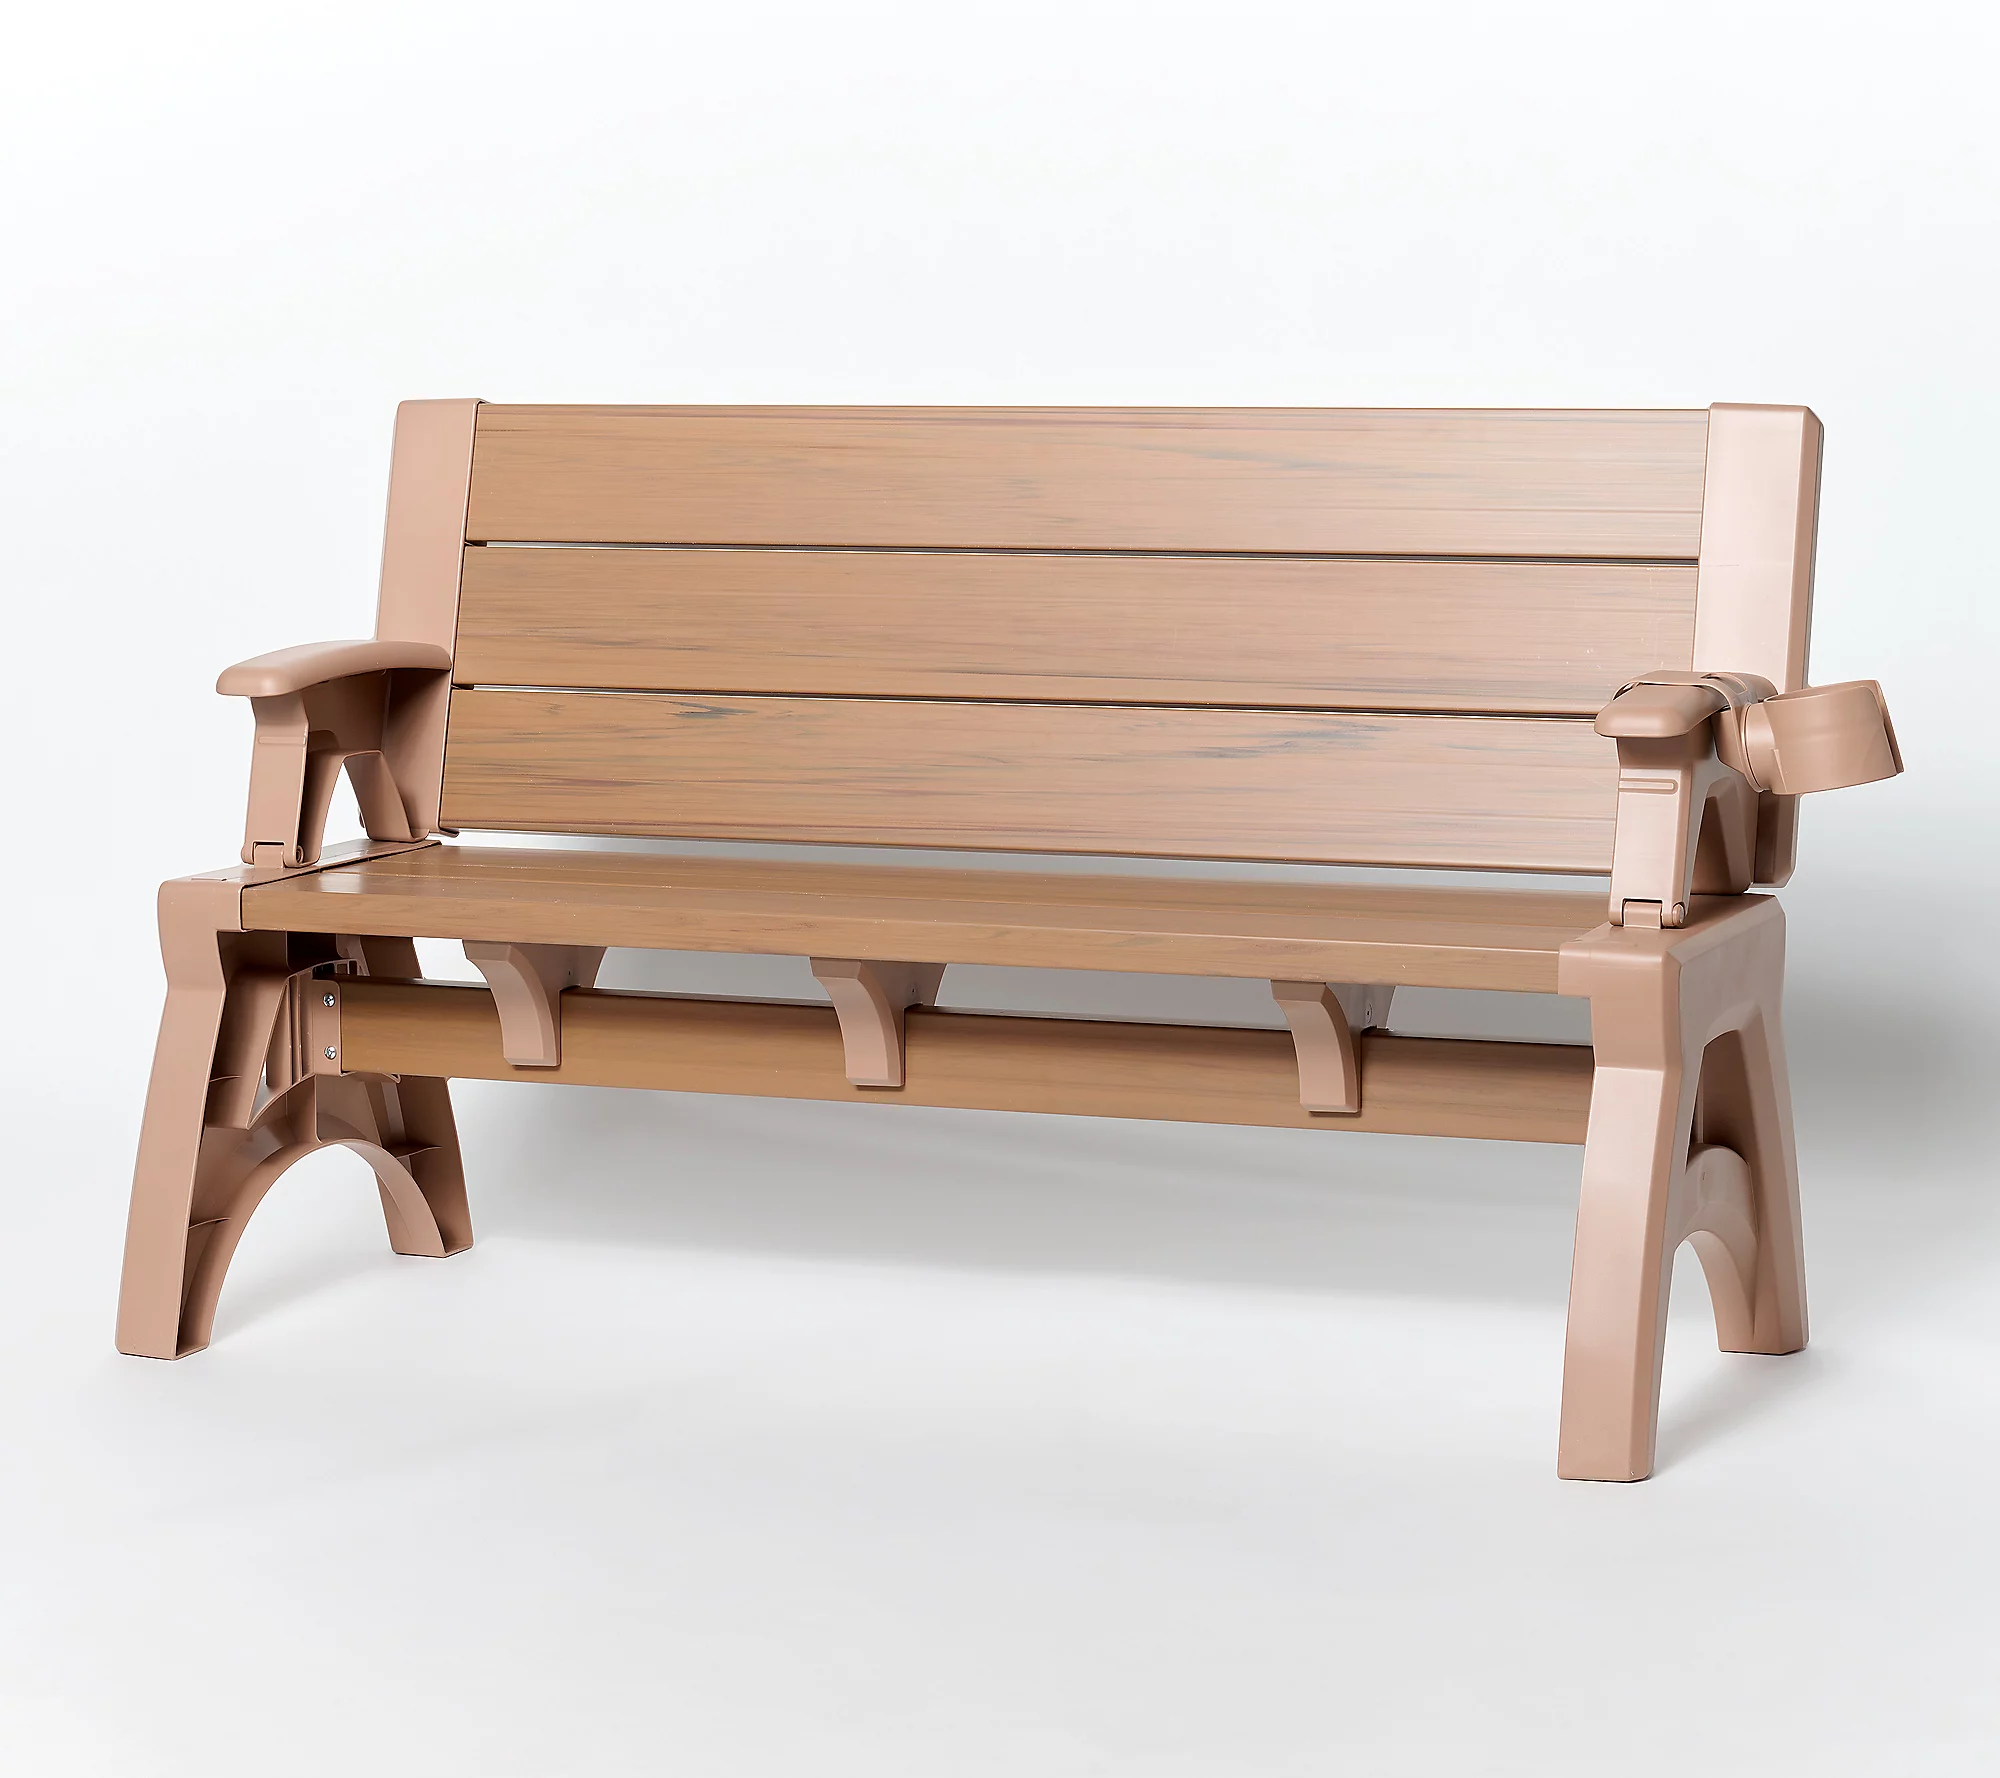 𝑭𝒂𝒕𝒉𝒆𝒓'𝒔 𝑫𝒂𝒚 𝑺𝒑𝒆𝒄𝒊𝒂𝒍𝒔 💝Buy 2 Get 2 Free ✨Convert-A-Bench Gen II XL Bench-to-Table with Cup Holder